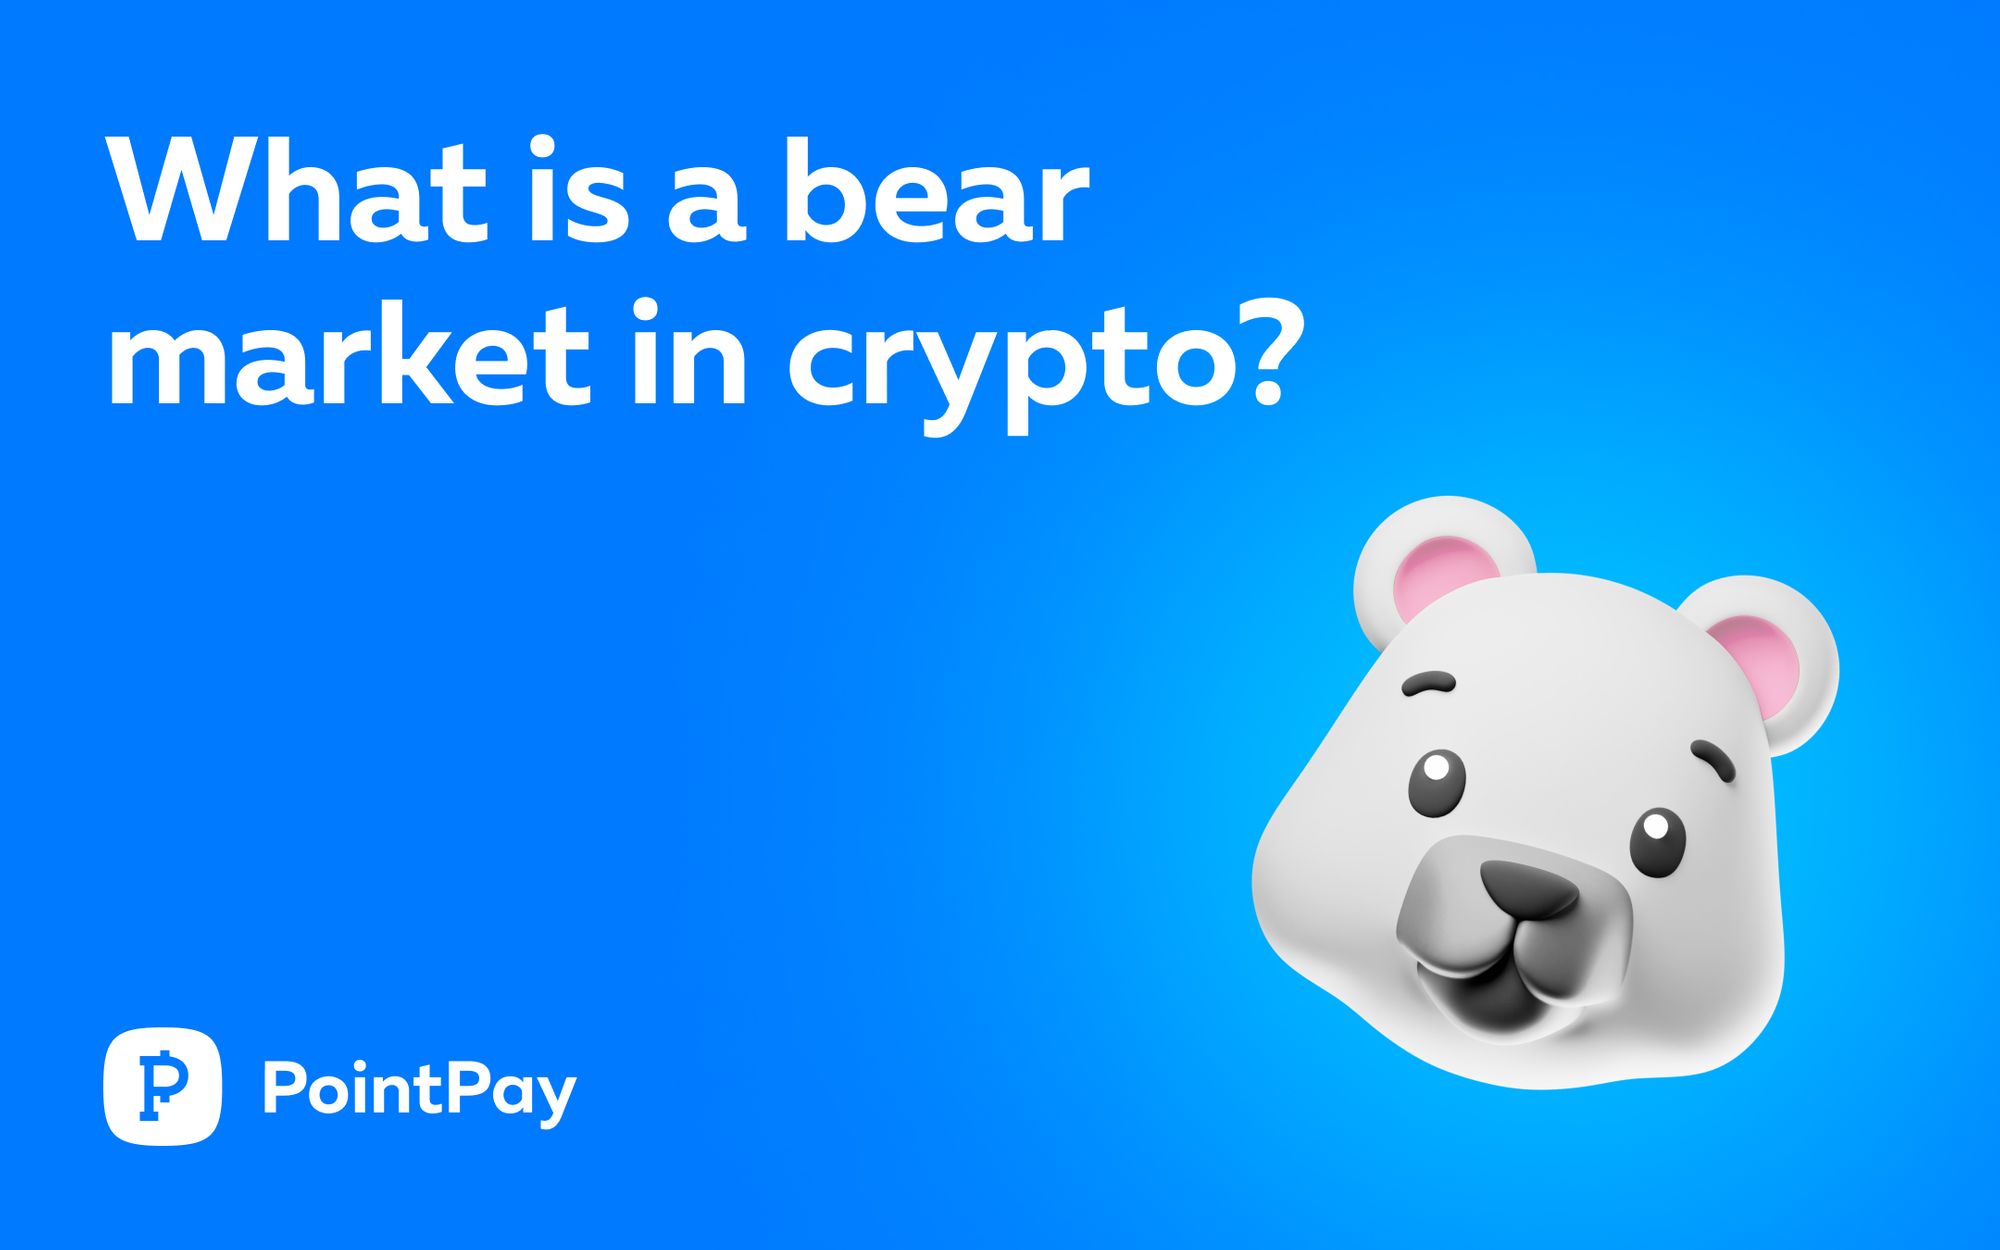 What is a bear market?